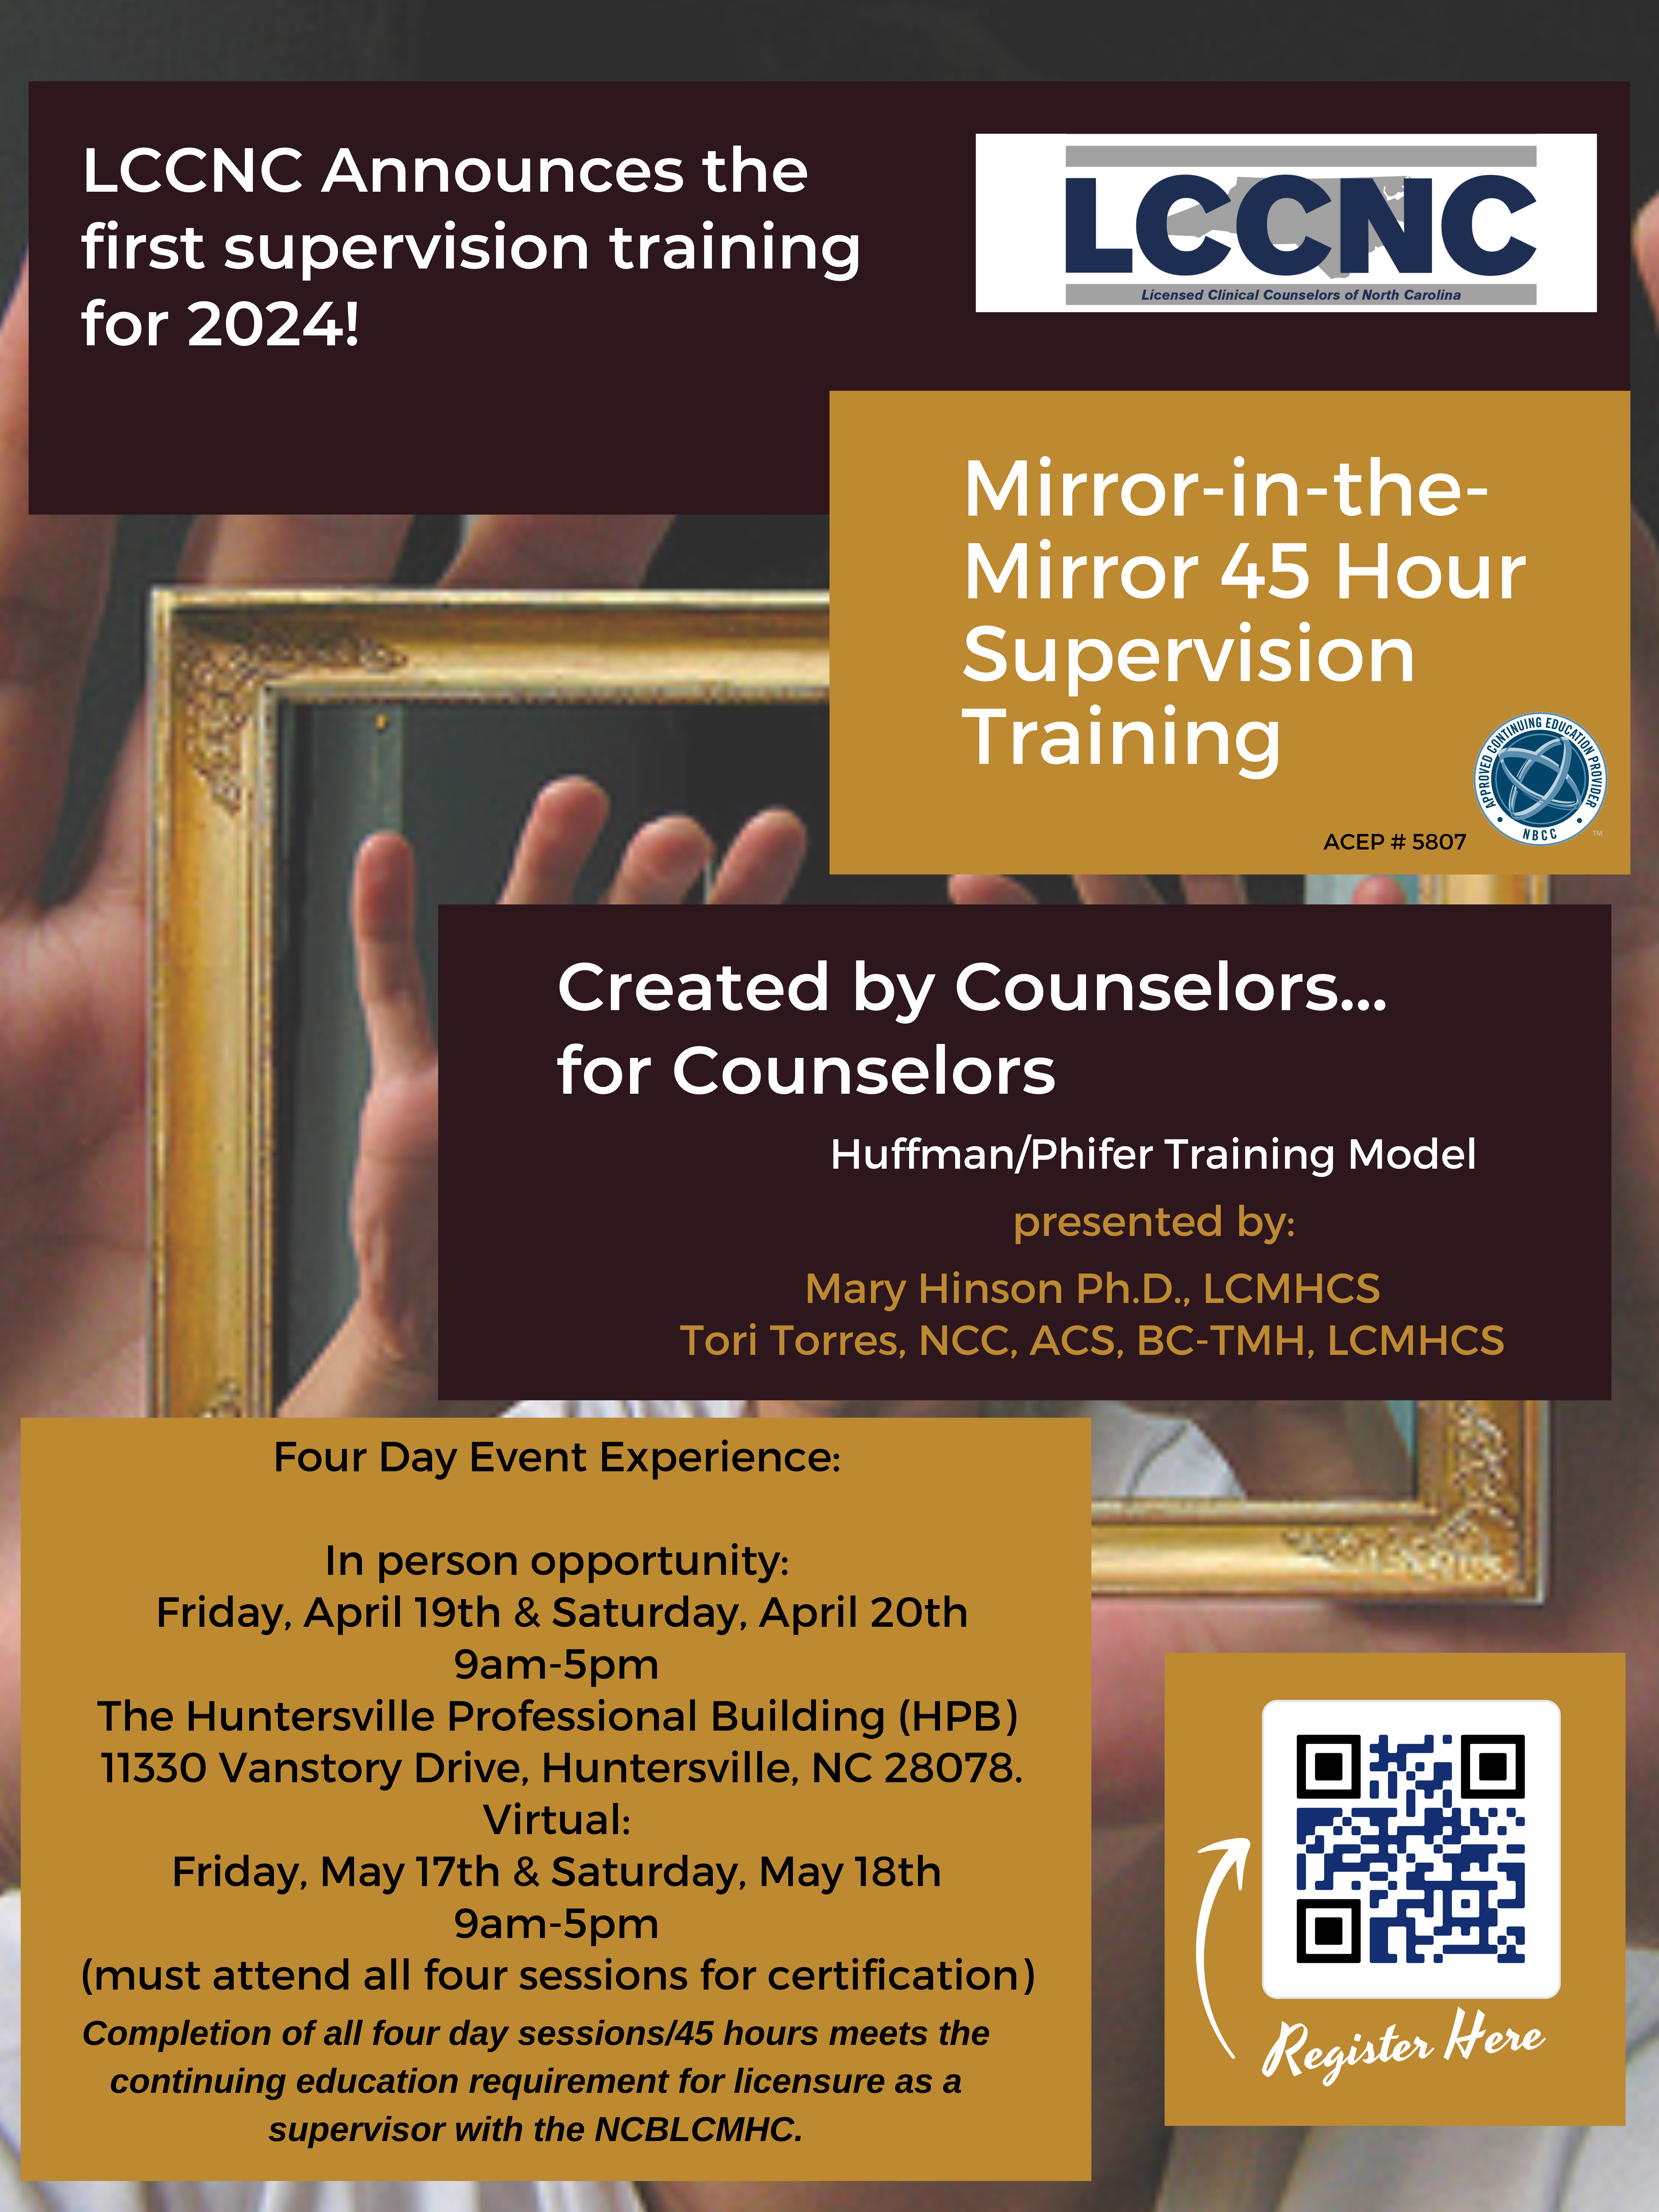 Mirror-in-the-Mirror Supervision Training flyer